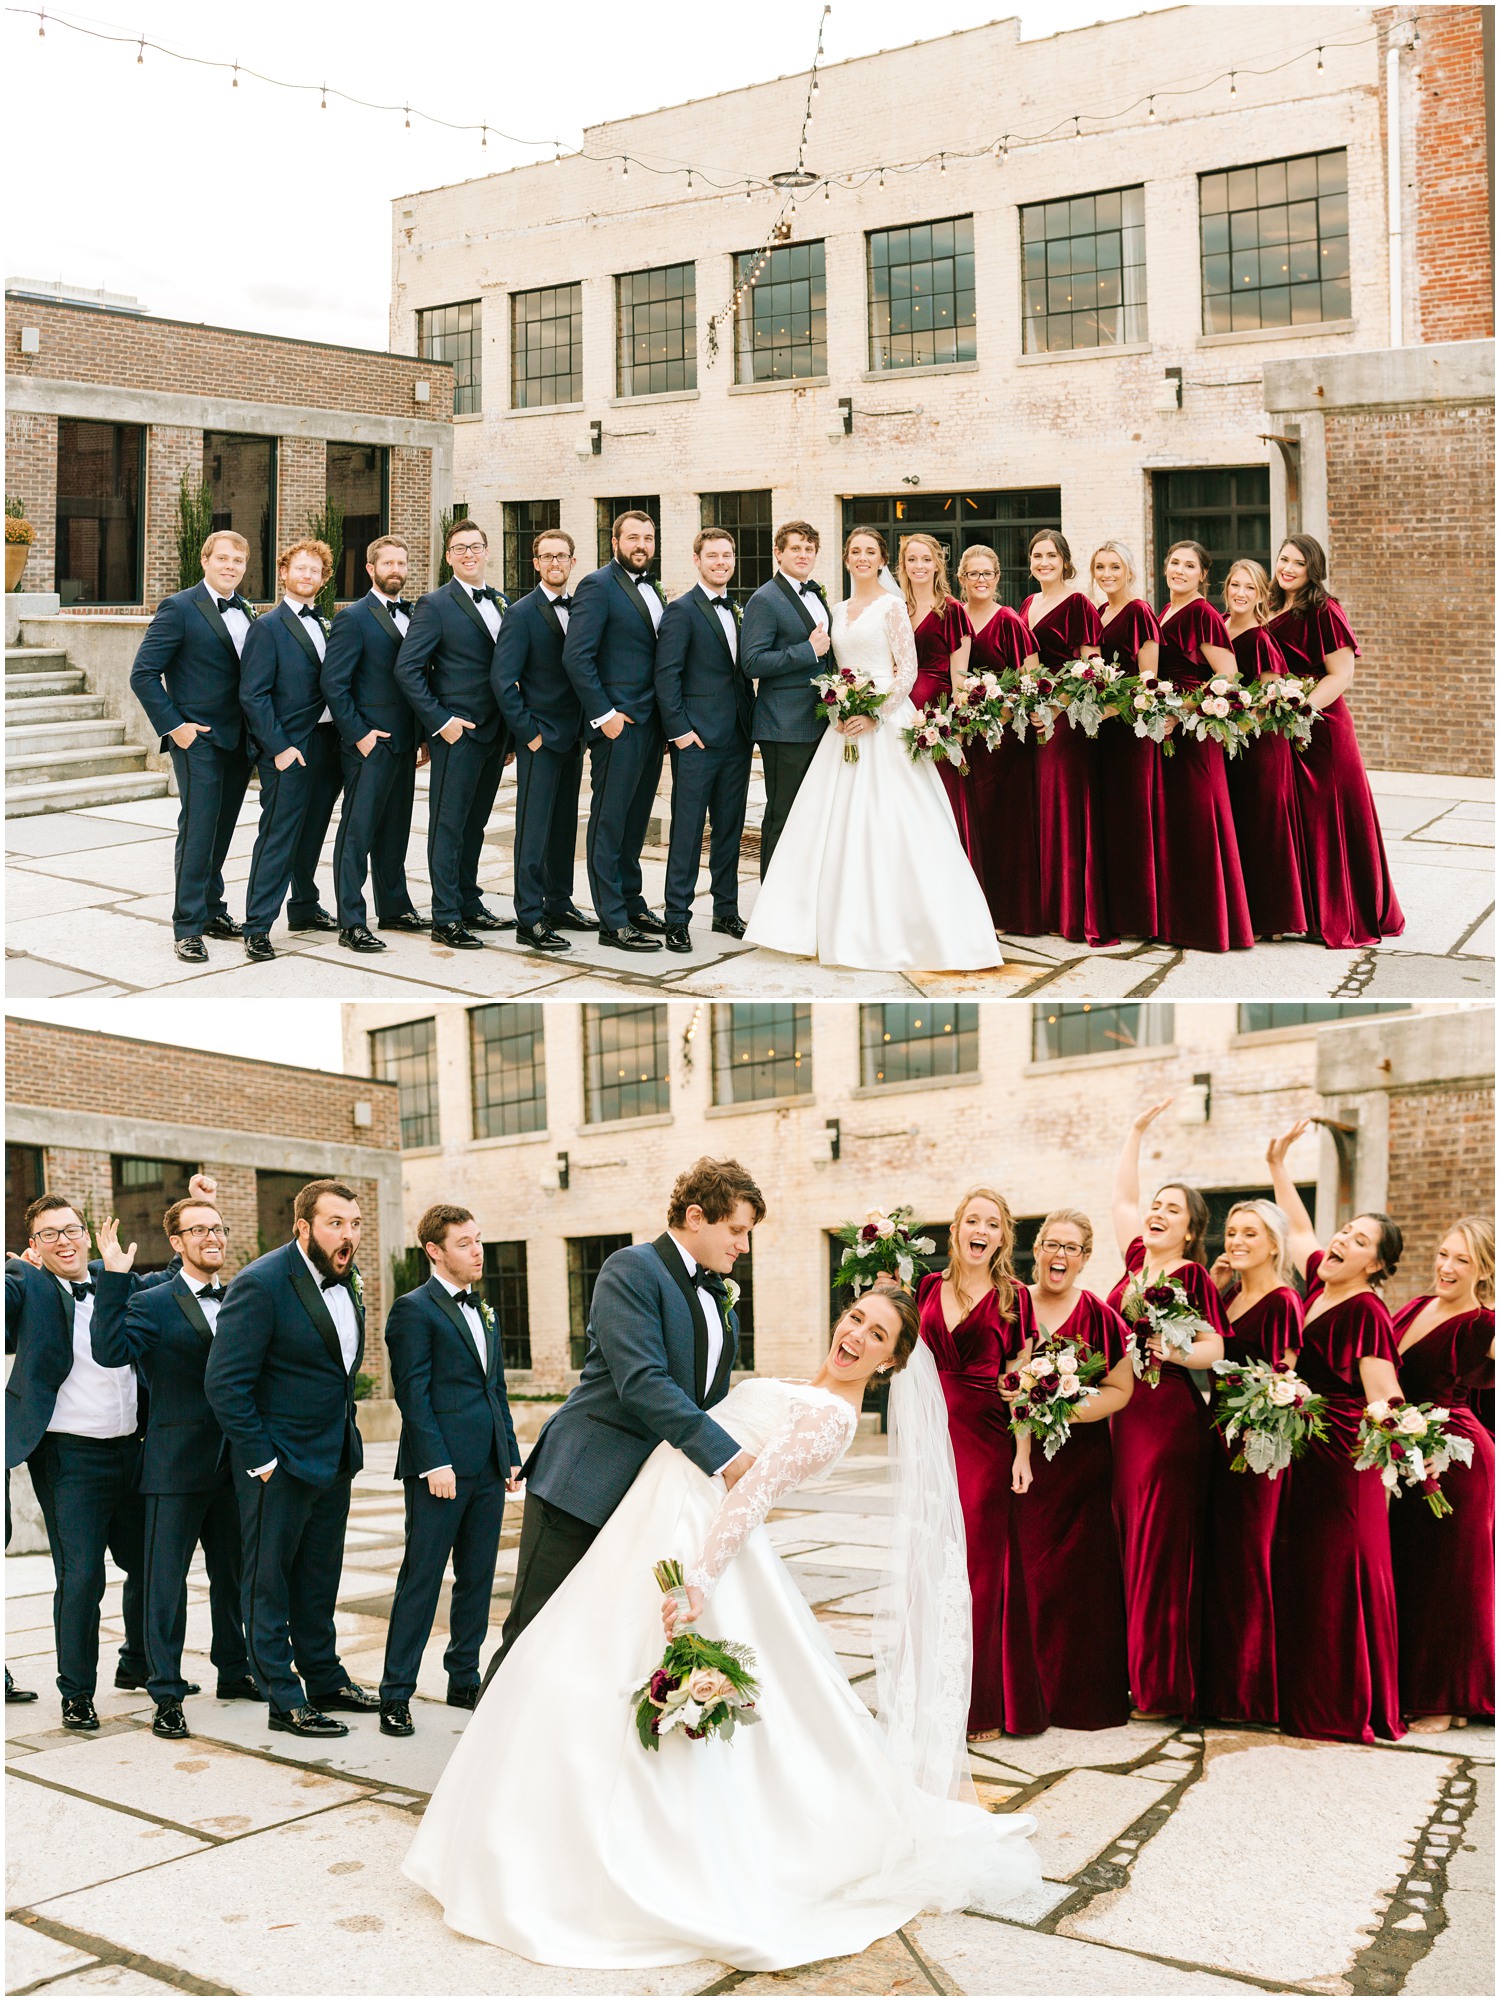 groomsmen in navy and bridesmaids in burgundy pose with bride and groom photographed by Chelsea Renay Photography